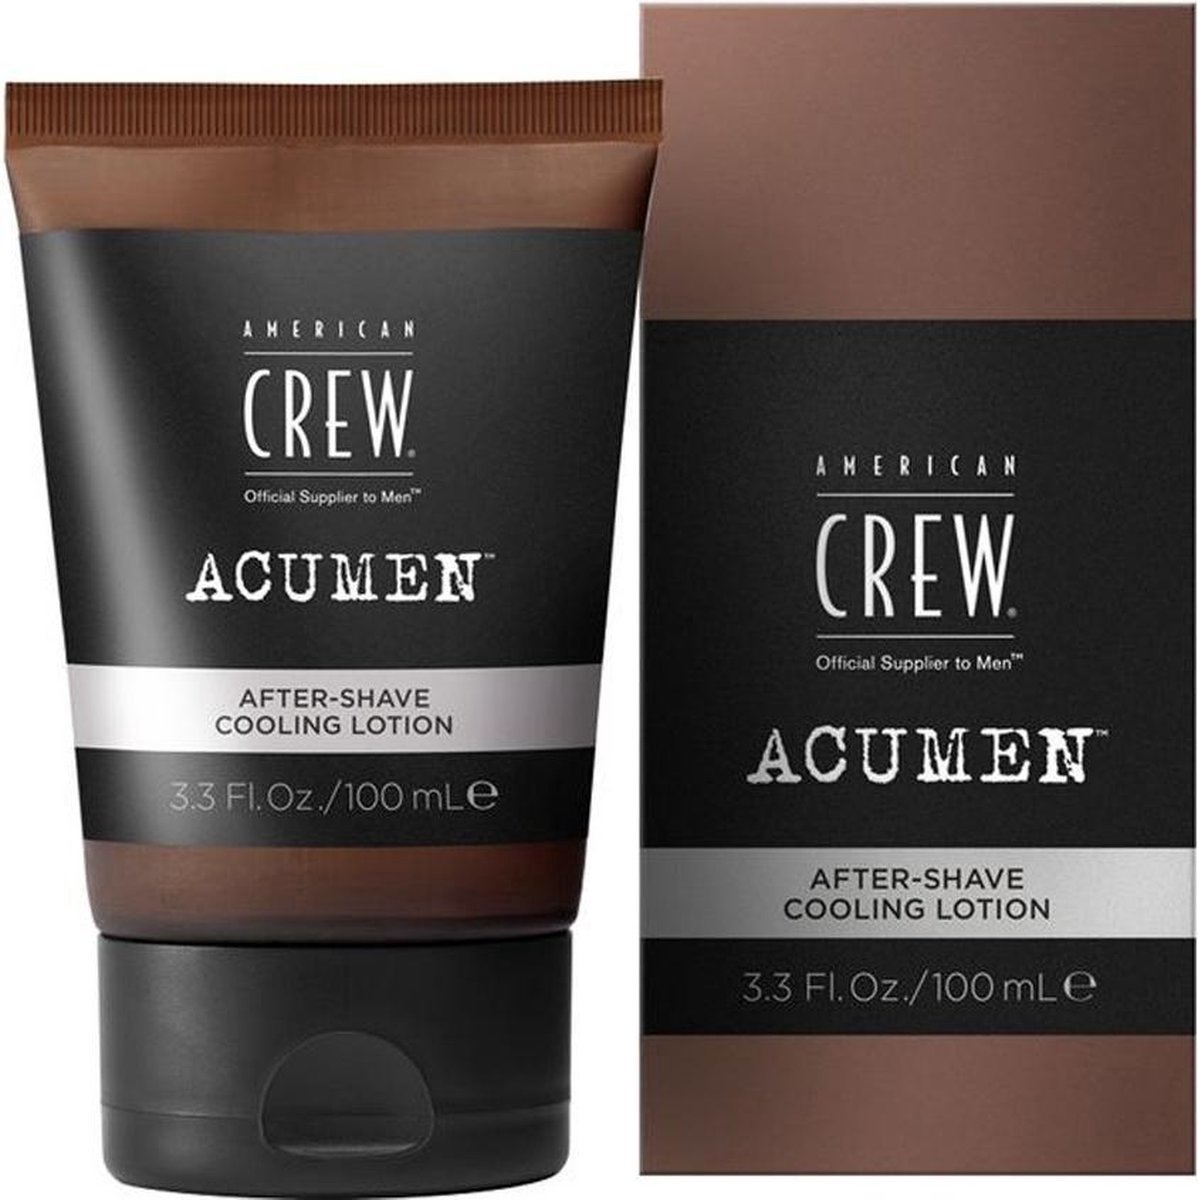 American crew Acumen After-shave cooling lotion 100ml